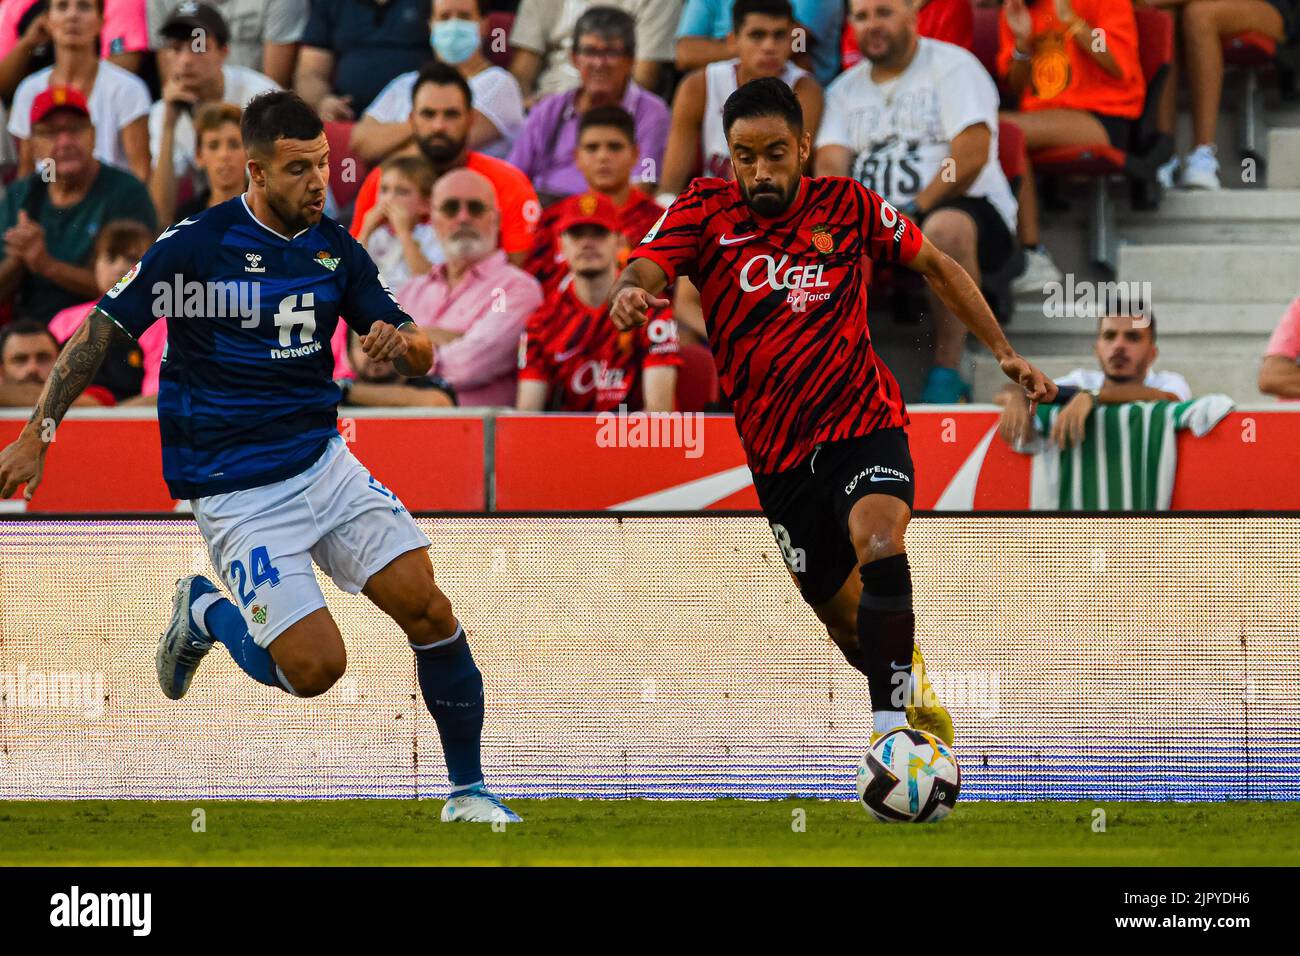 MALLORCA, SPAIN - AUGUST 20: Jaume Costa of RCD Mallorca in the match between RCD Mallorca and Real Betis of La Liga Santander on August 20, 2022 at Visit Mallorca Stadium Son Moix in Mallorca, Spain. (Photo by Samuel Carreño/PxImages) Stock Photo